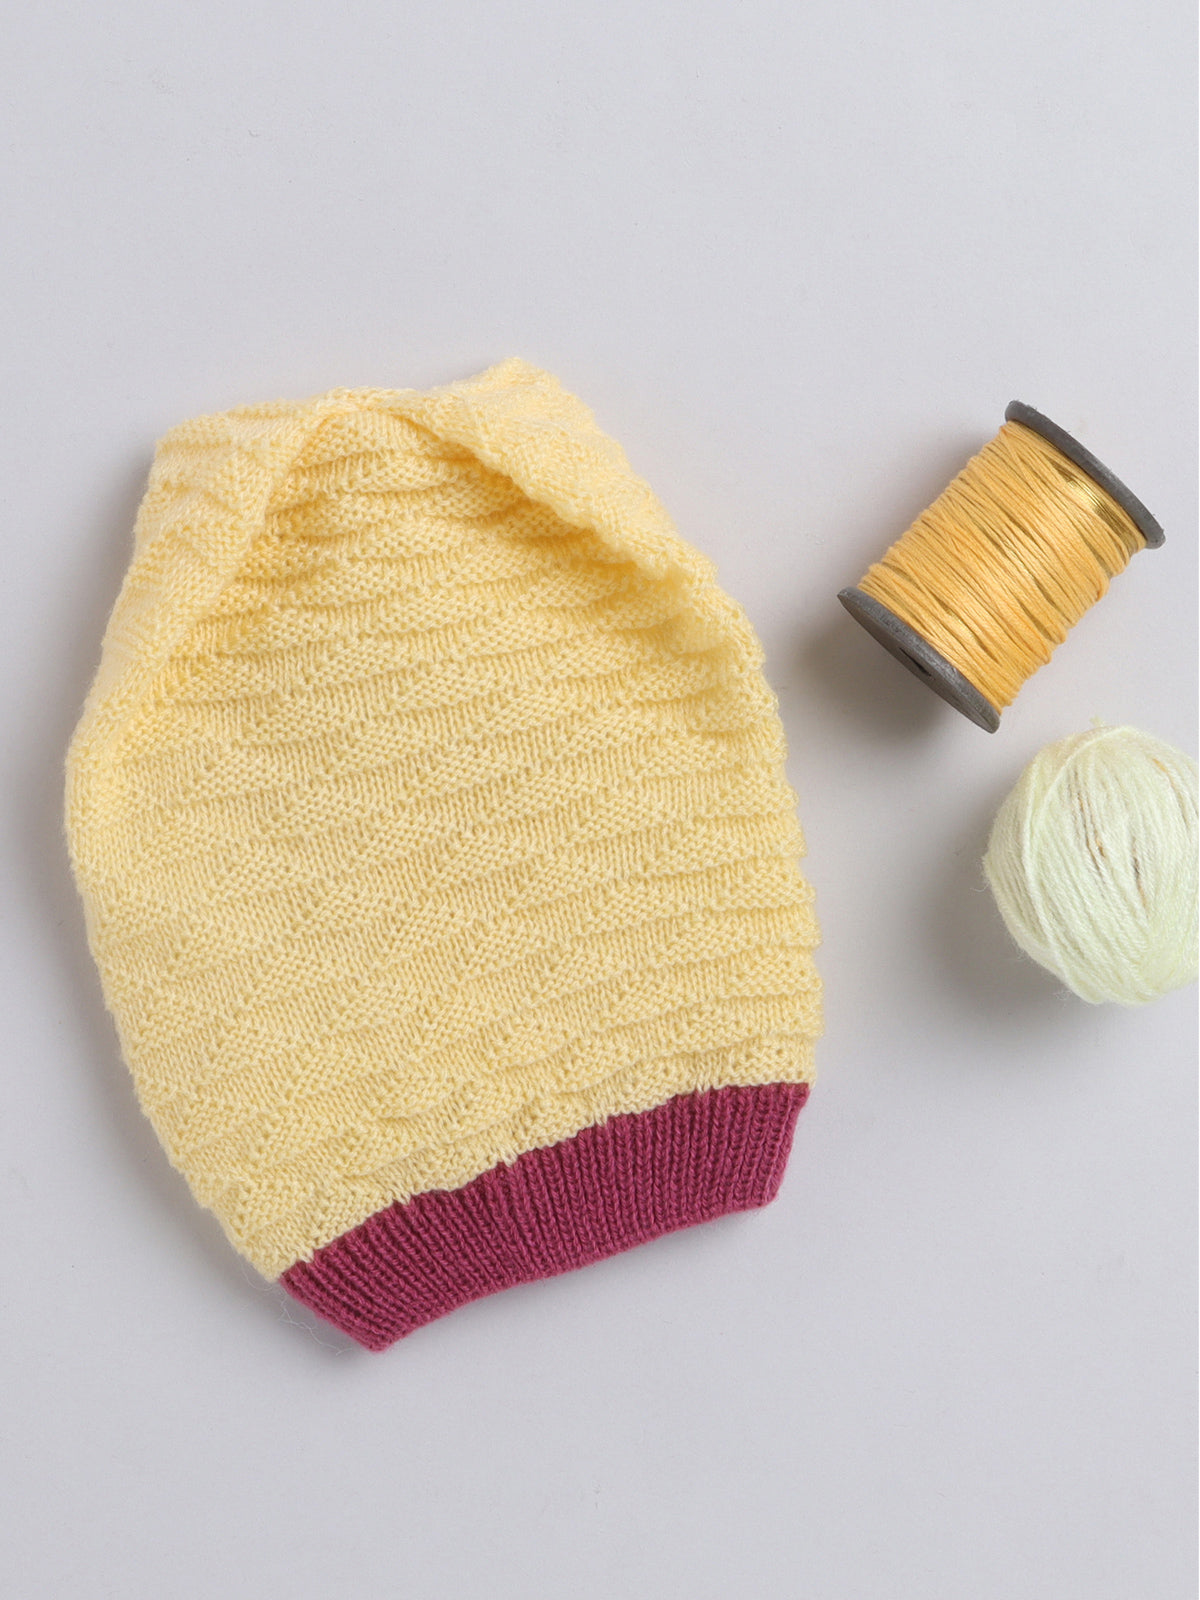 Elegant Knited Textured Round Cap with, Yellow Color